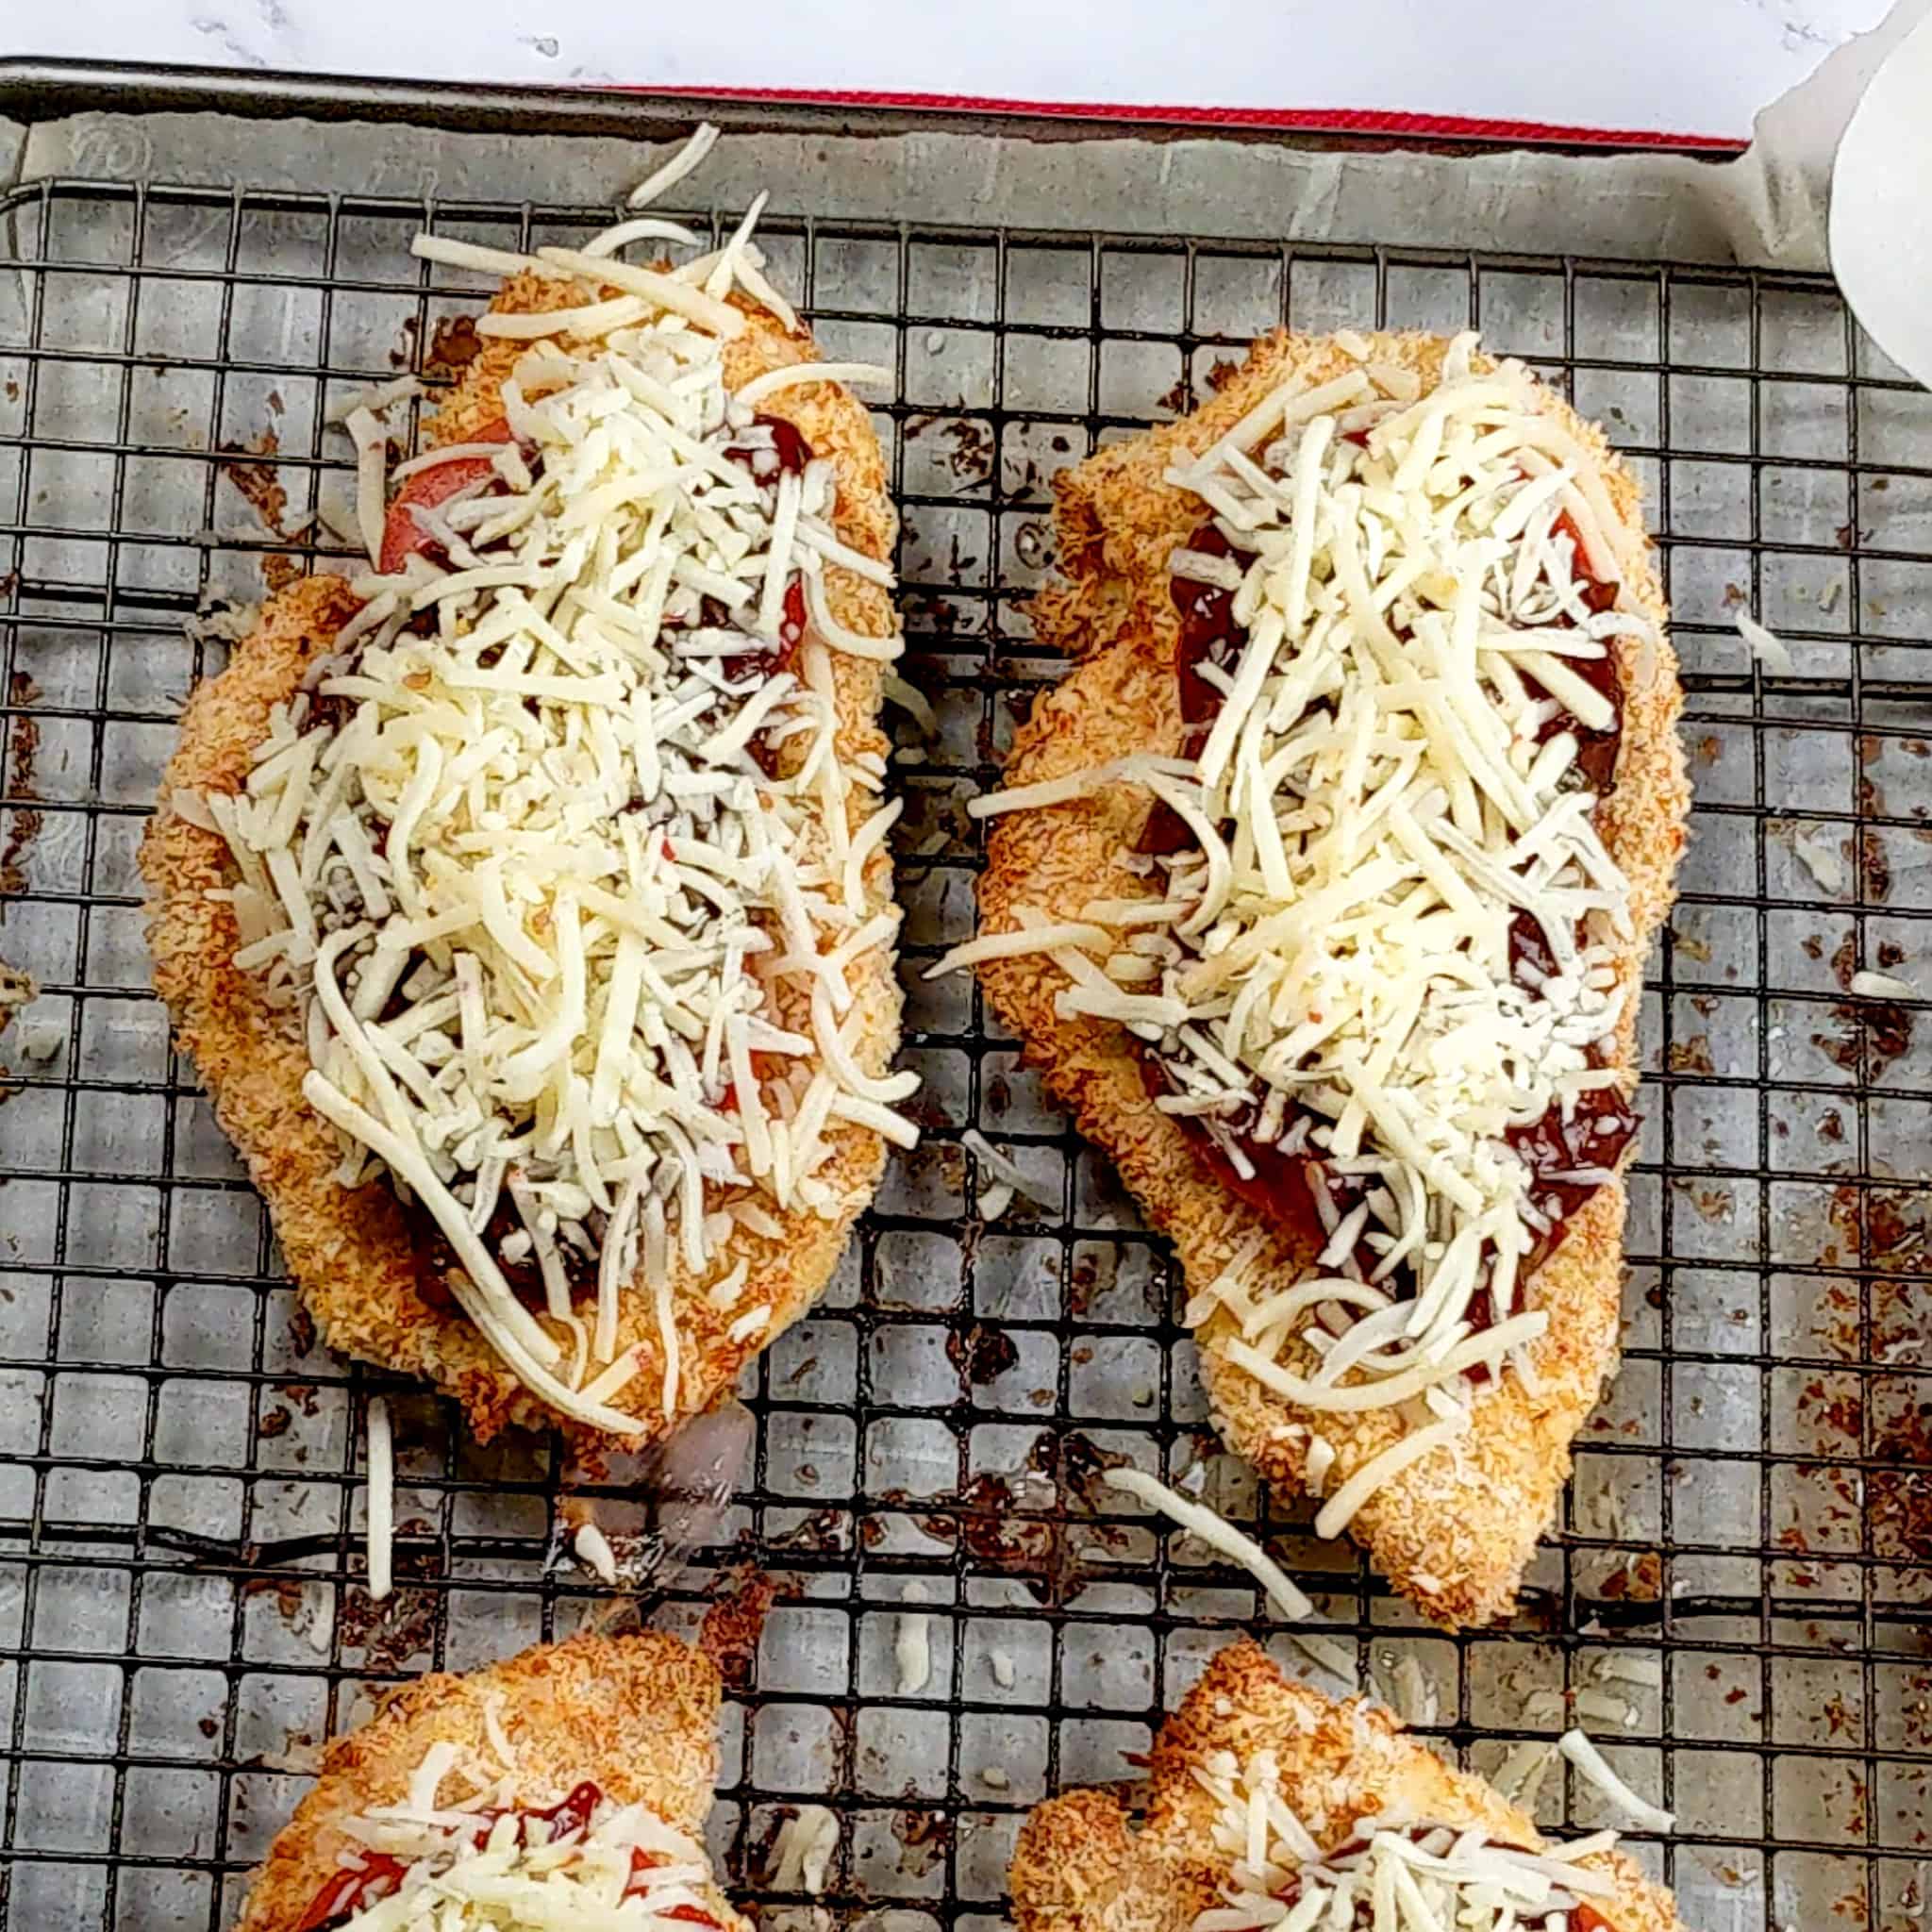 Baked chicken cutlets topped with sliced tomatoes, barbeque sauce, and shredded pepper jack cheese on a sheet pan with a rack.